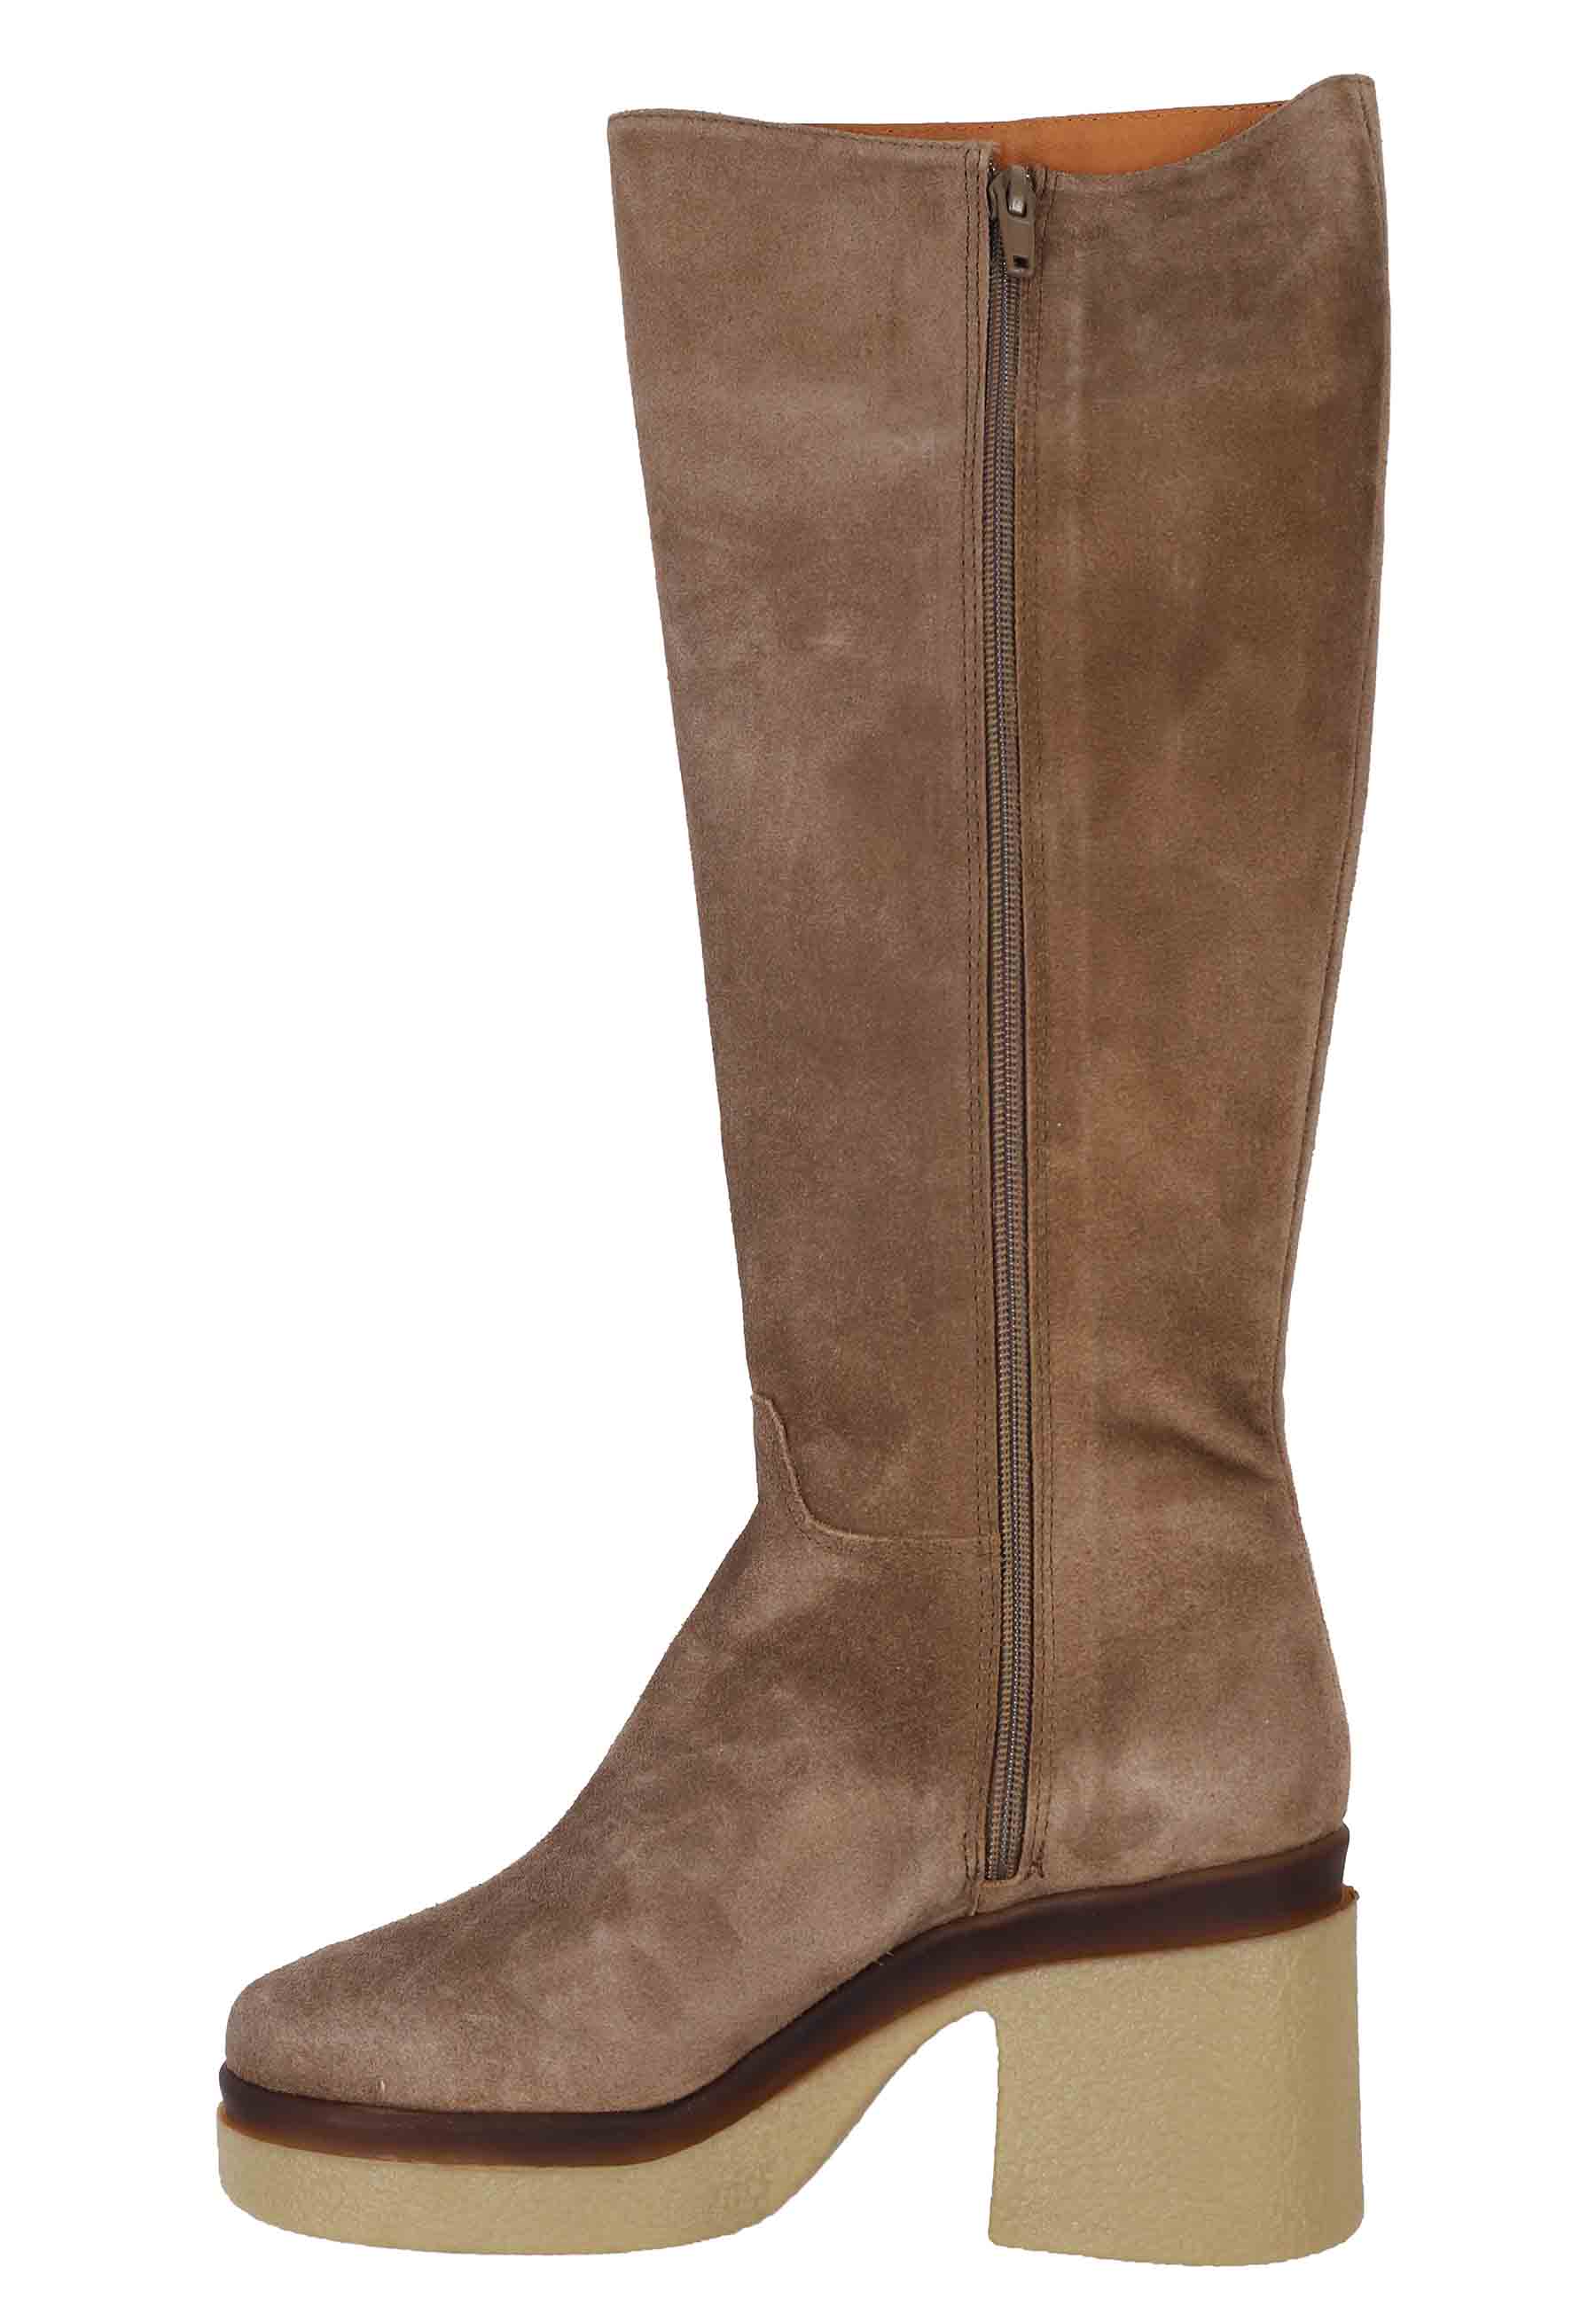 Women's boots in taupe suede with high crepe wedge